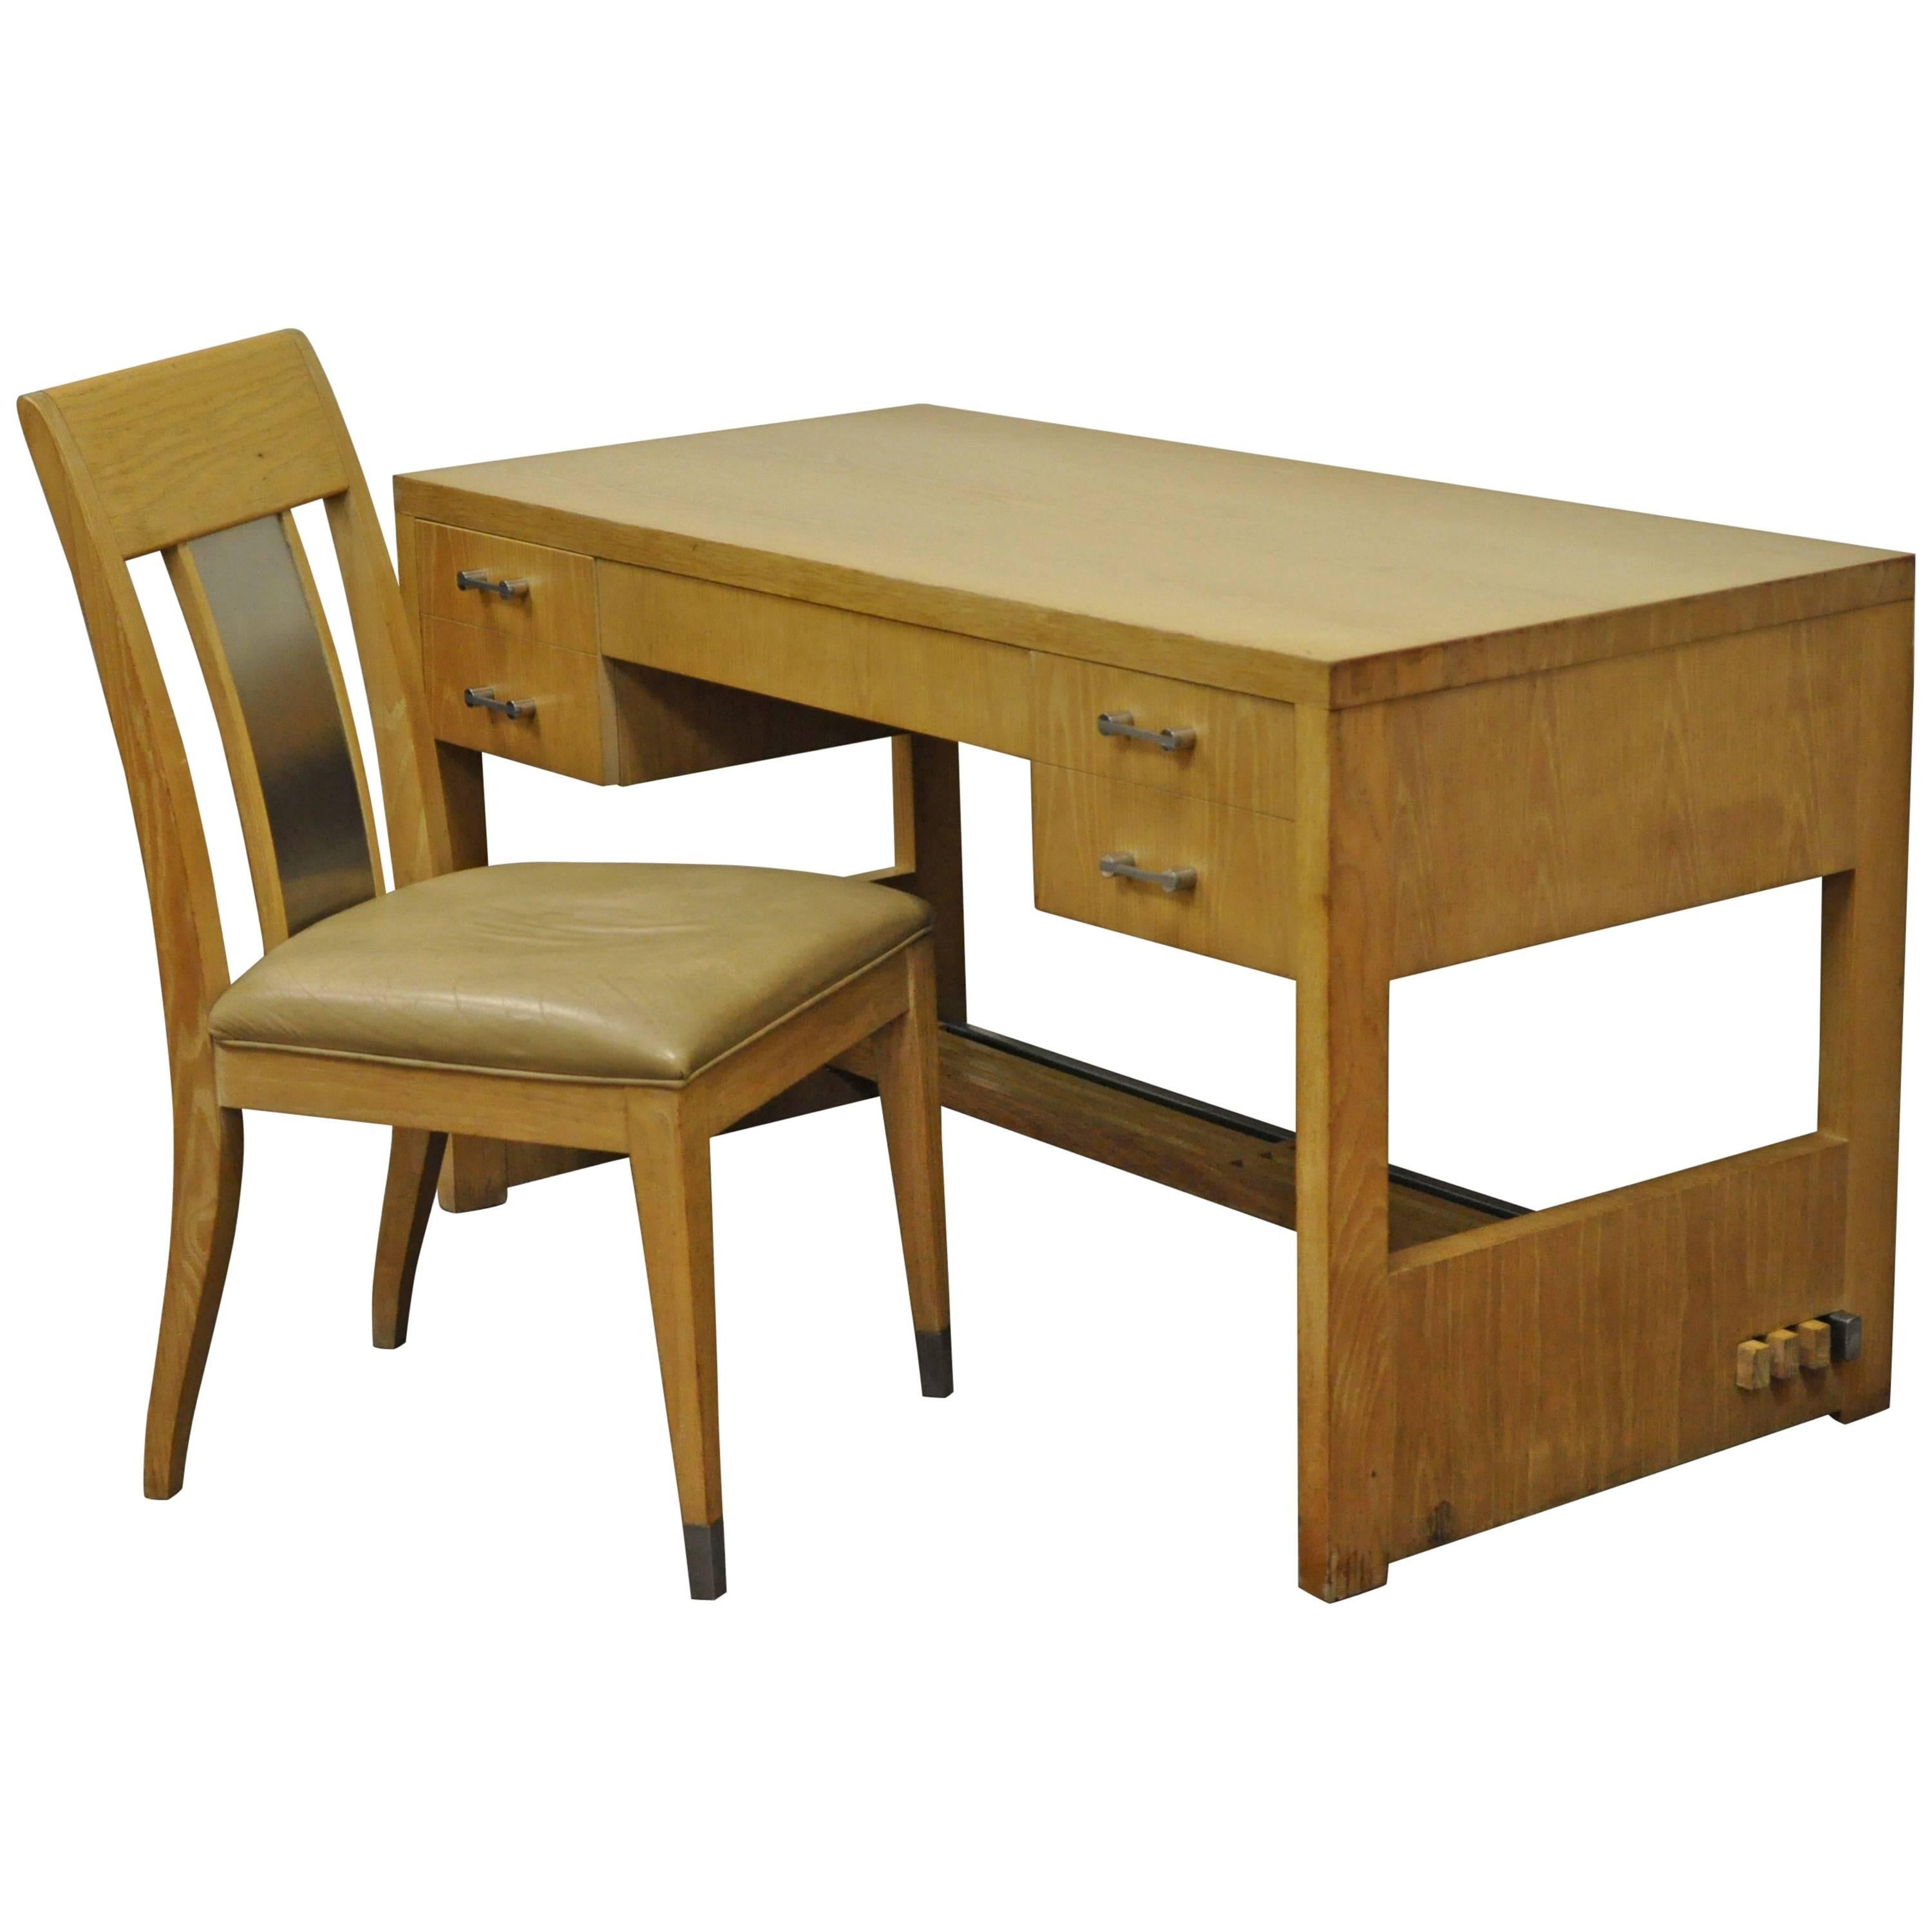 Mid-Century Modern Cerused Oak Desk and Side Chair by Jay Spectre for Century For Sale